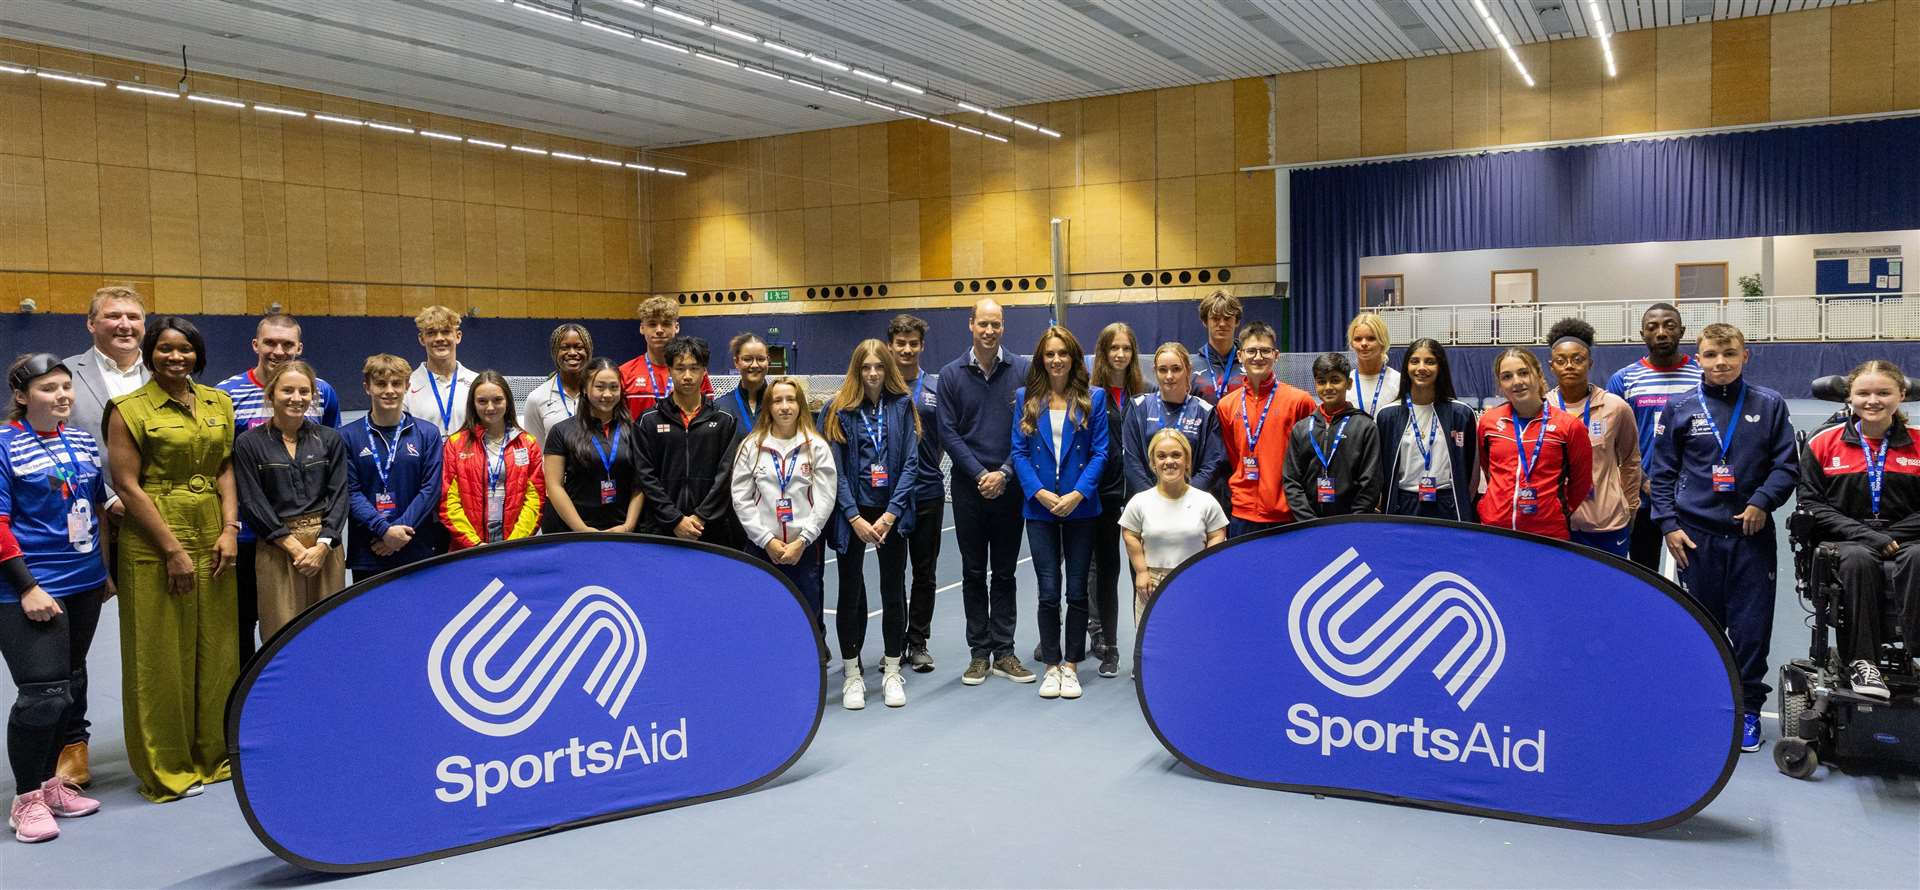 Bromley fencer Amelie Tsang and a host of other young athletes met the Prince and Princess of Wales at Bisham Abbey National Sports Centre